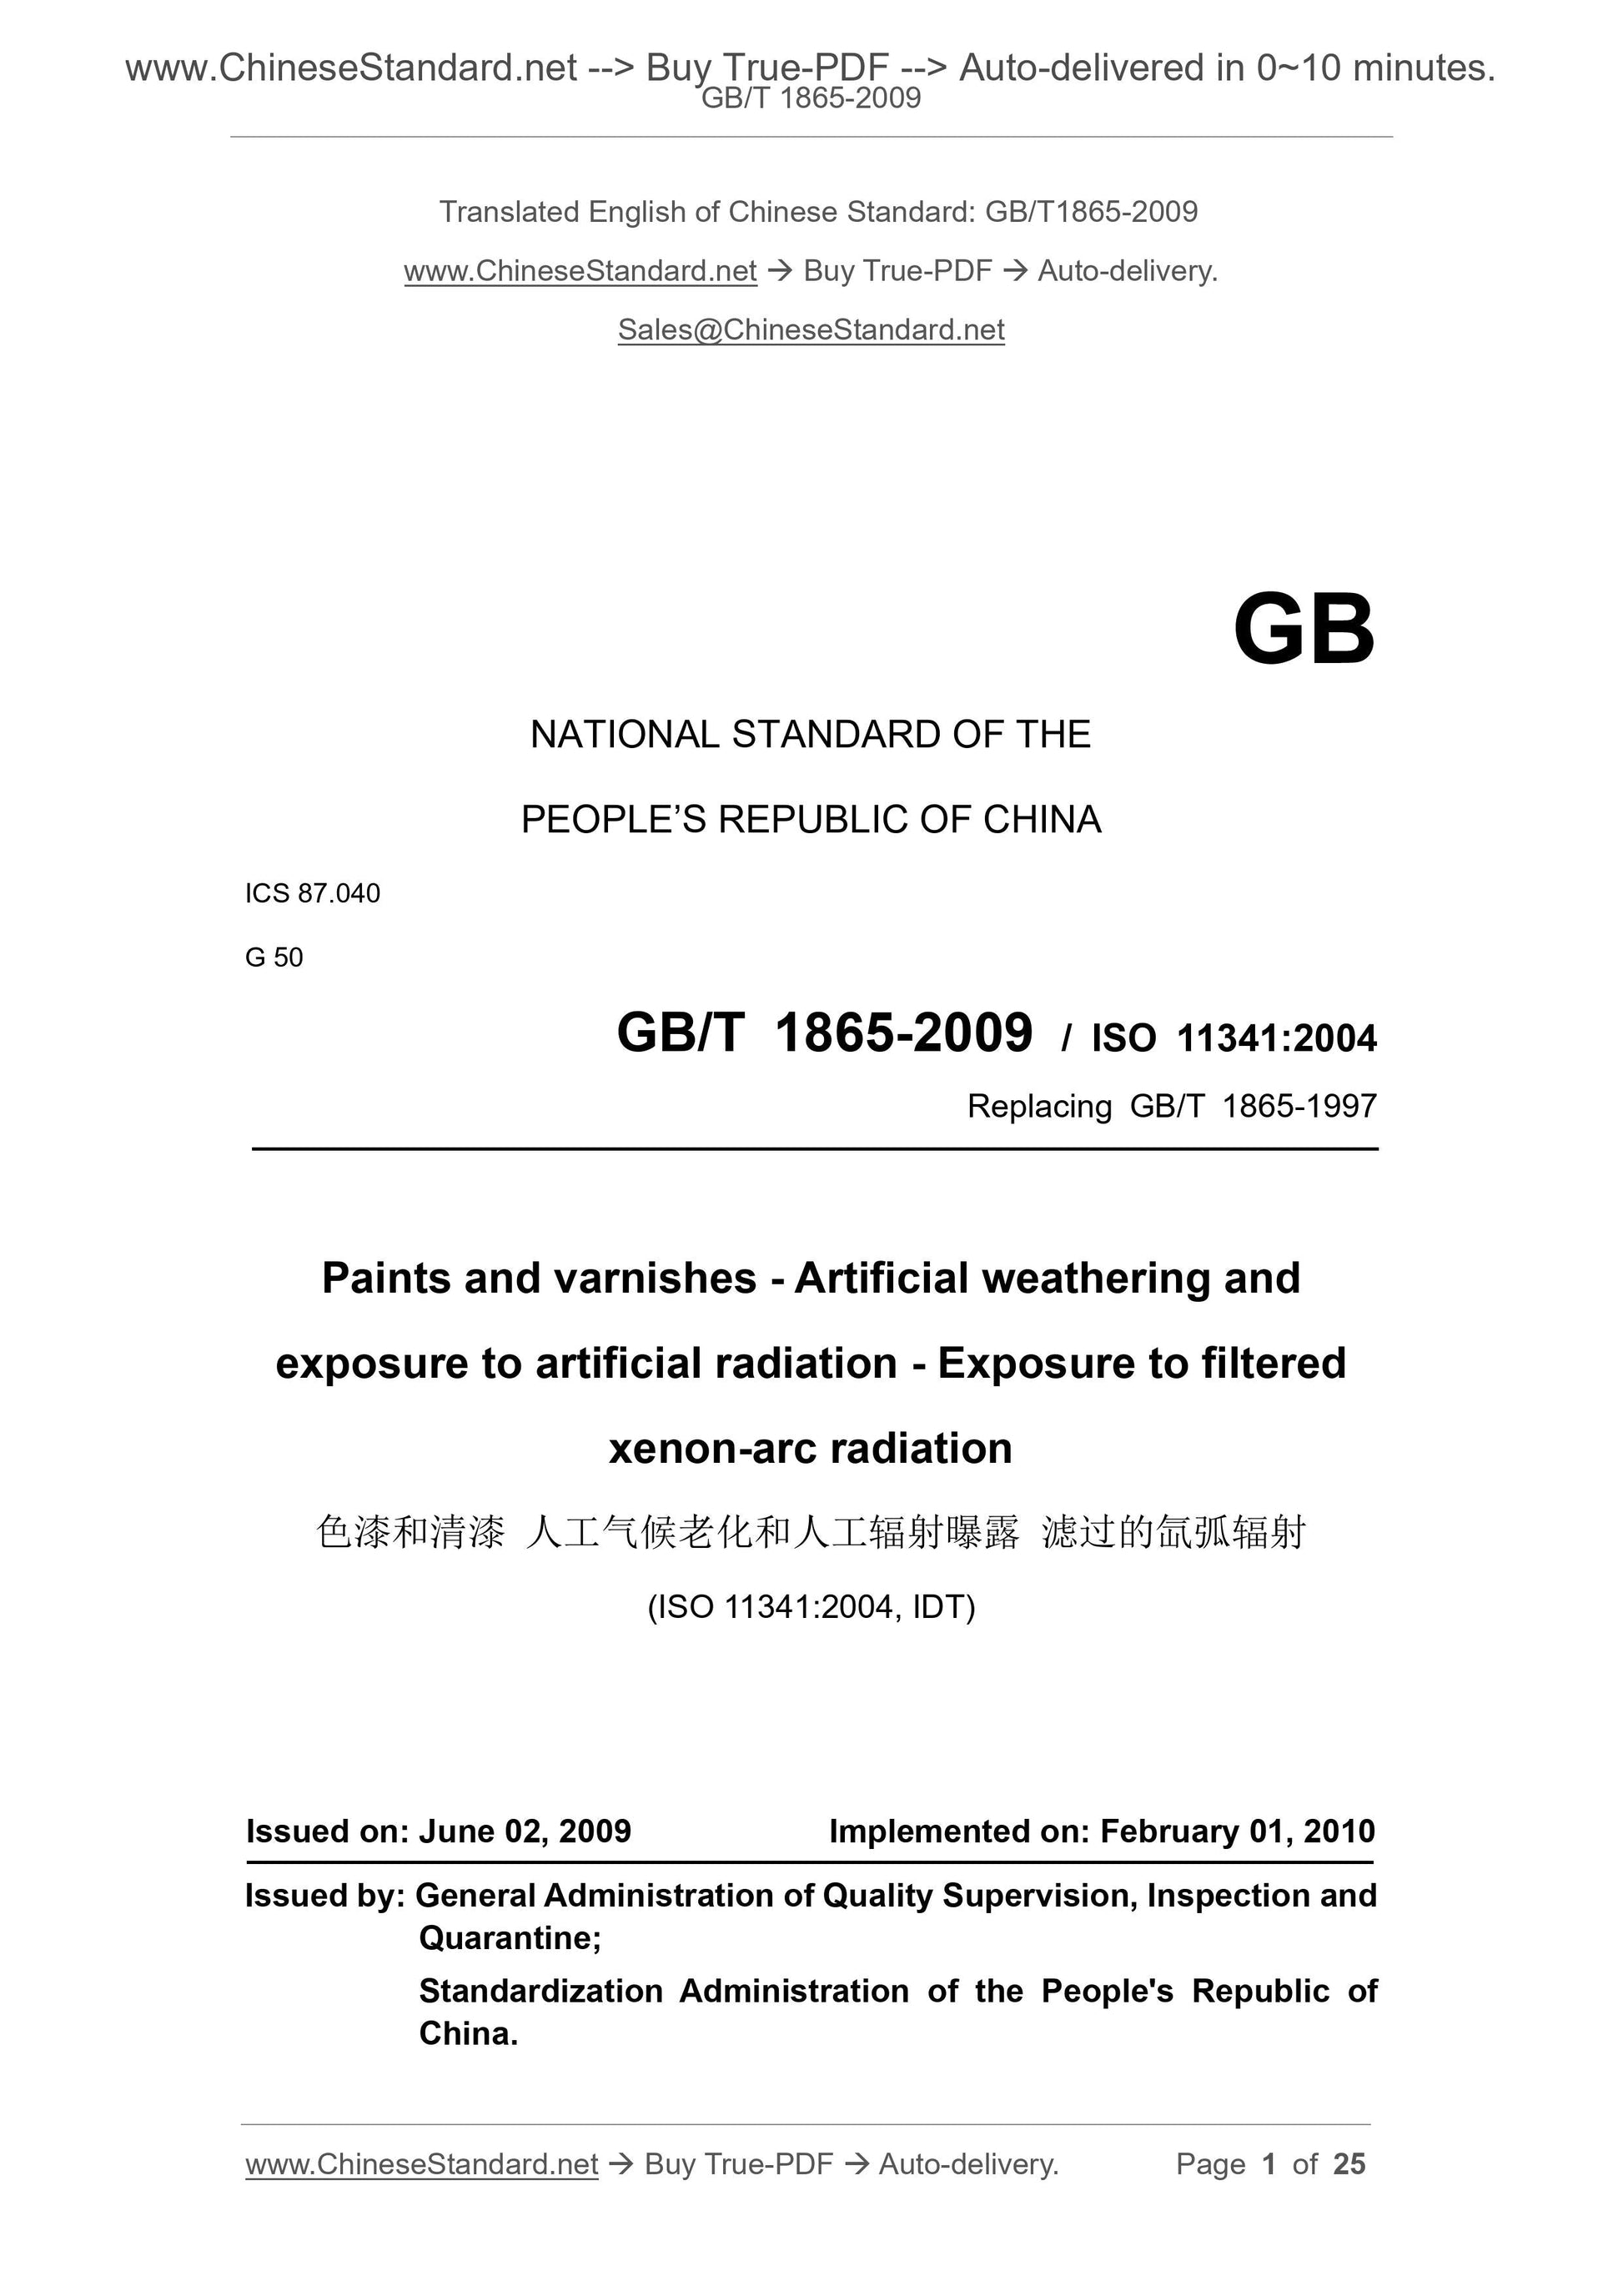 GB/T 1865-2009 Page 1